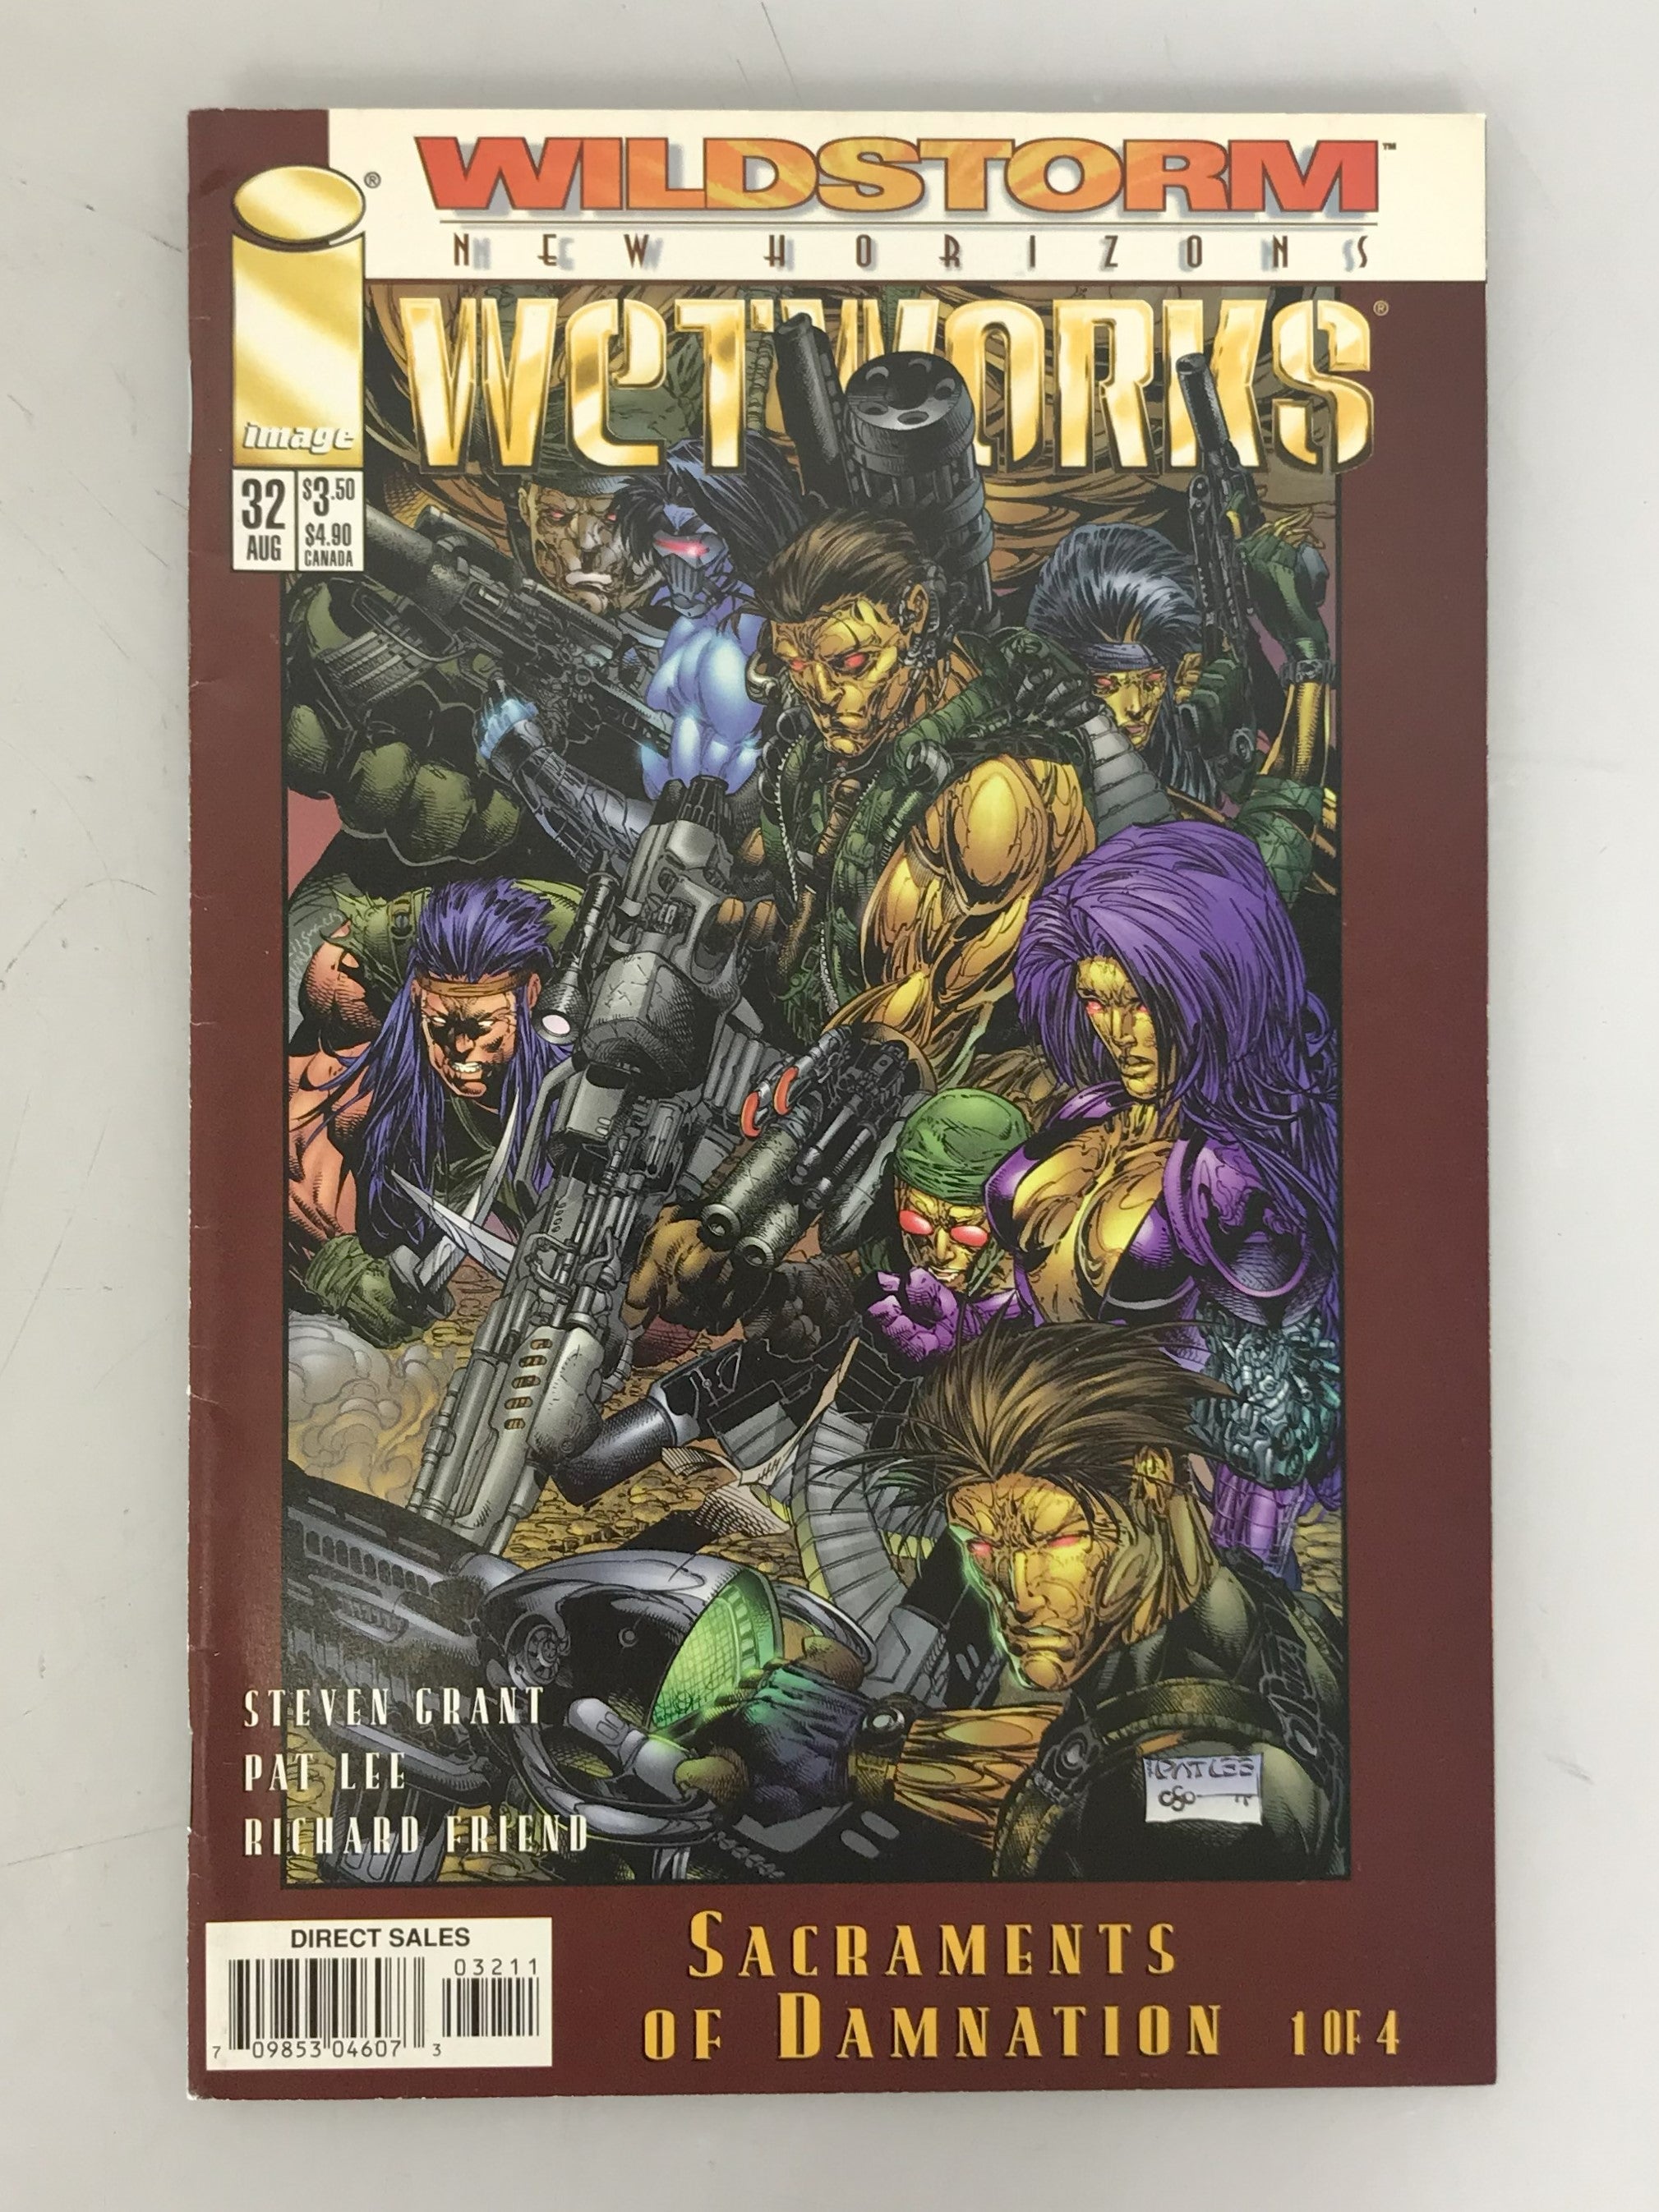 Wetworks 32 1997